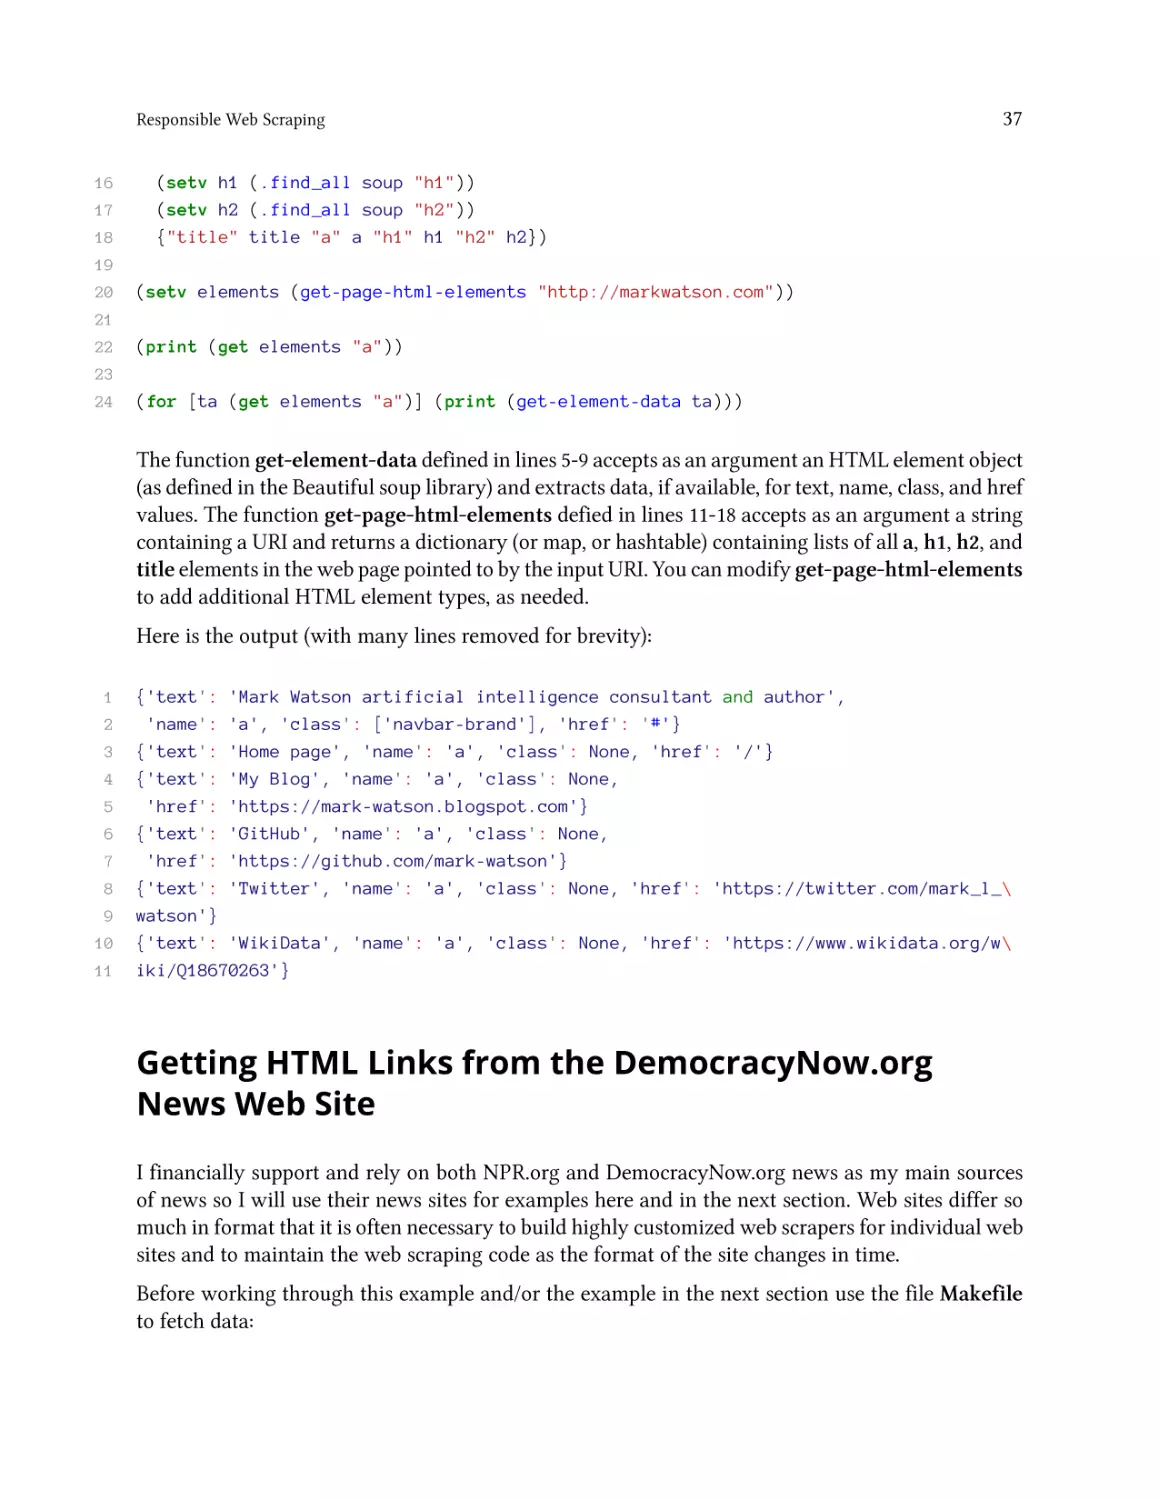 Getting HTML Links from the DemocracyNow.org News Web Site